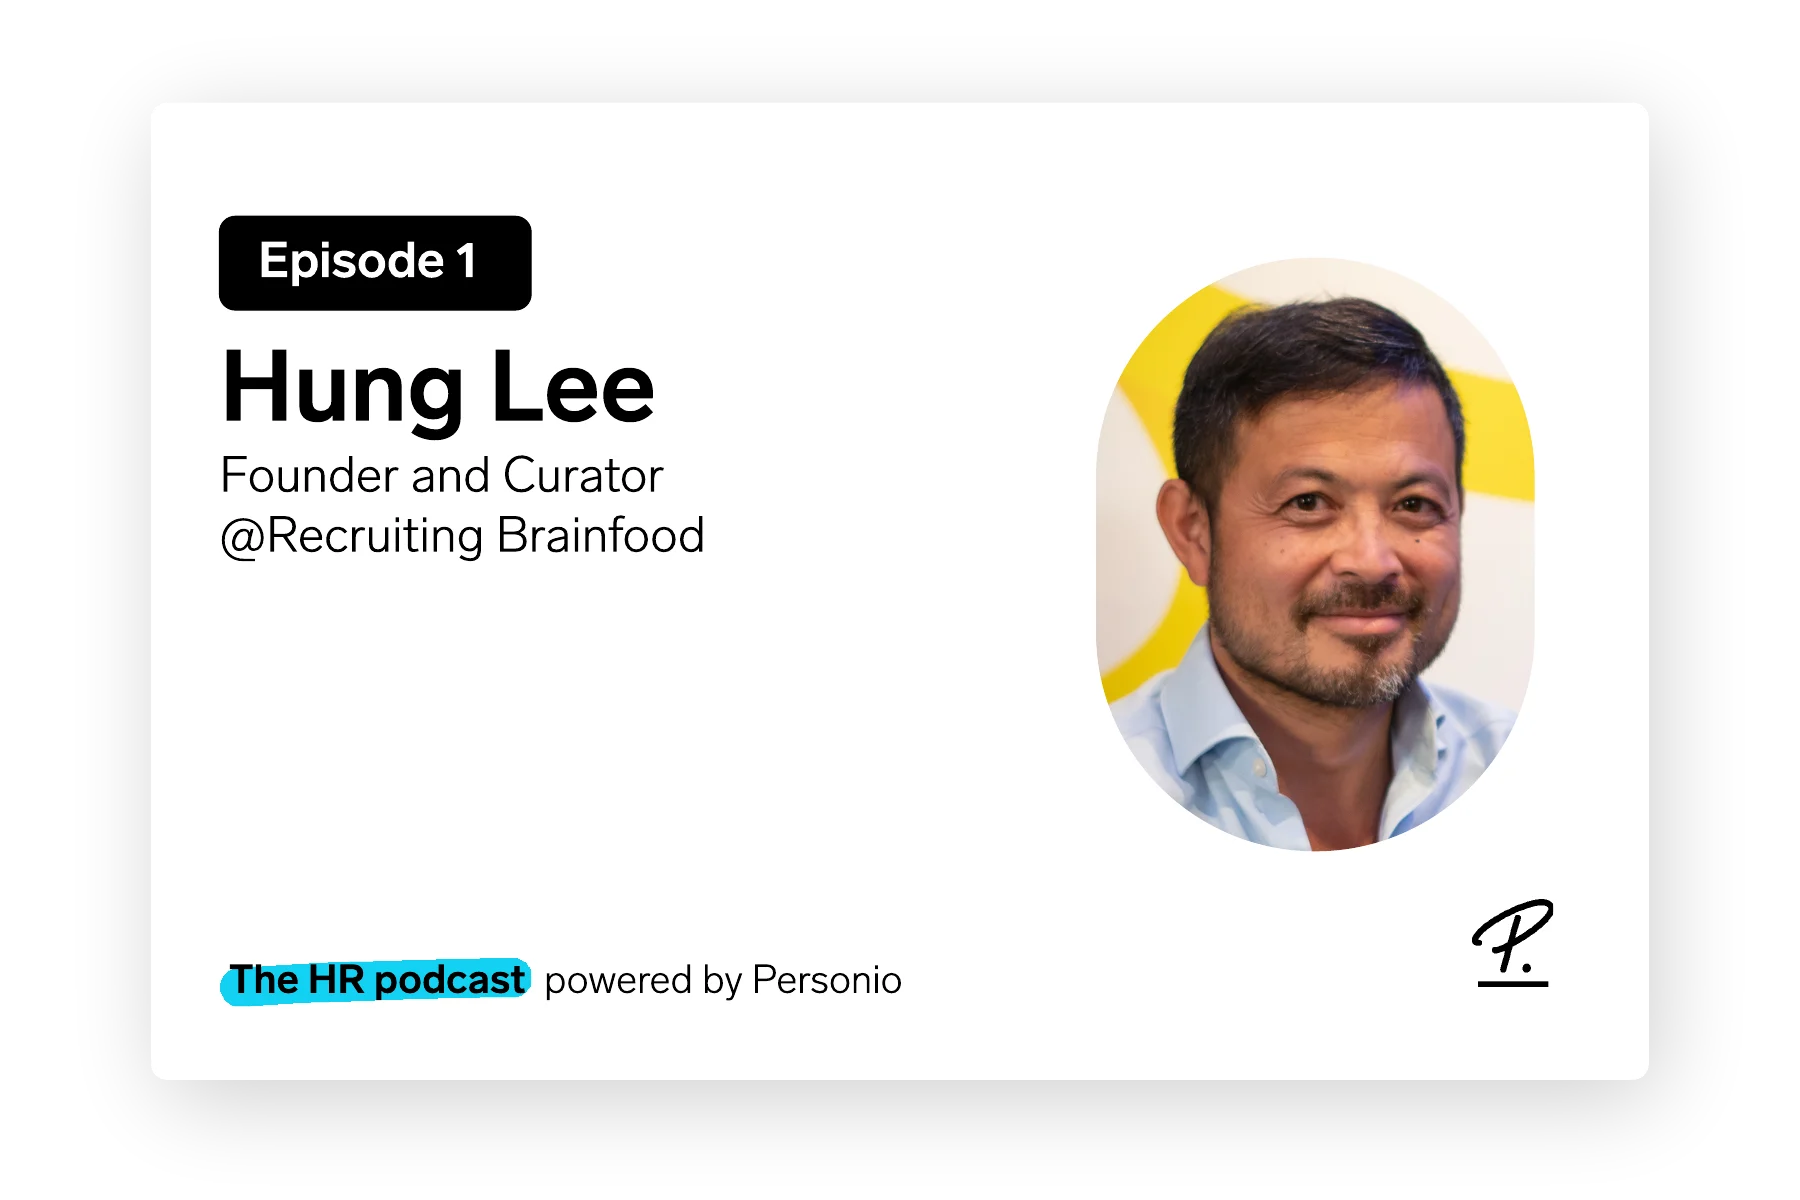 Podcast with Hung Lee